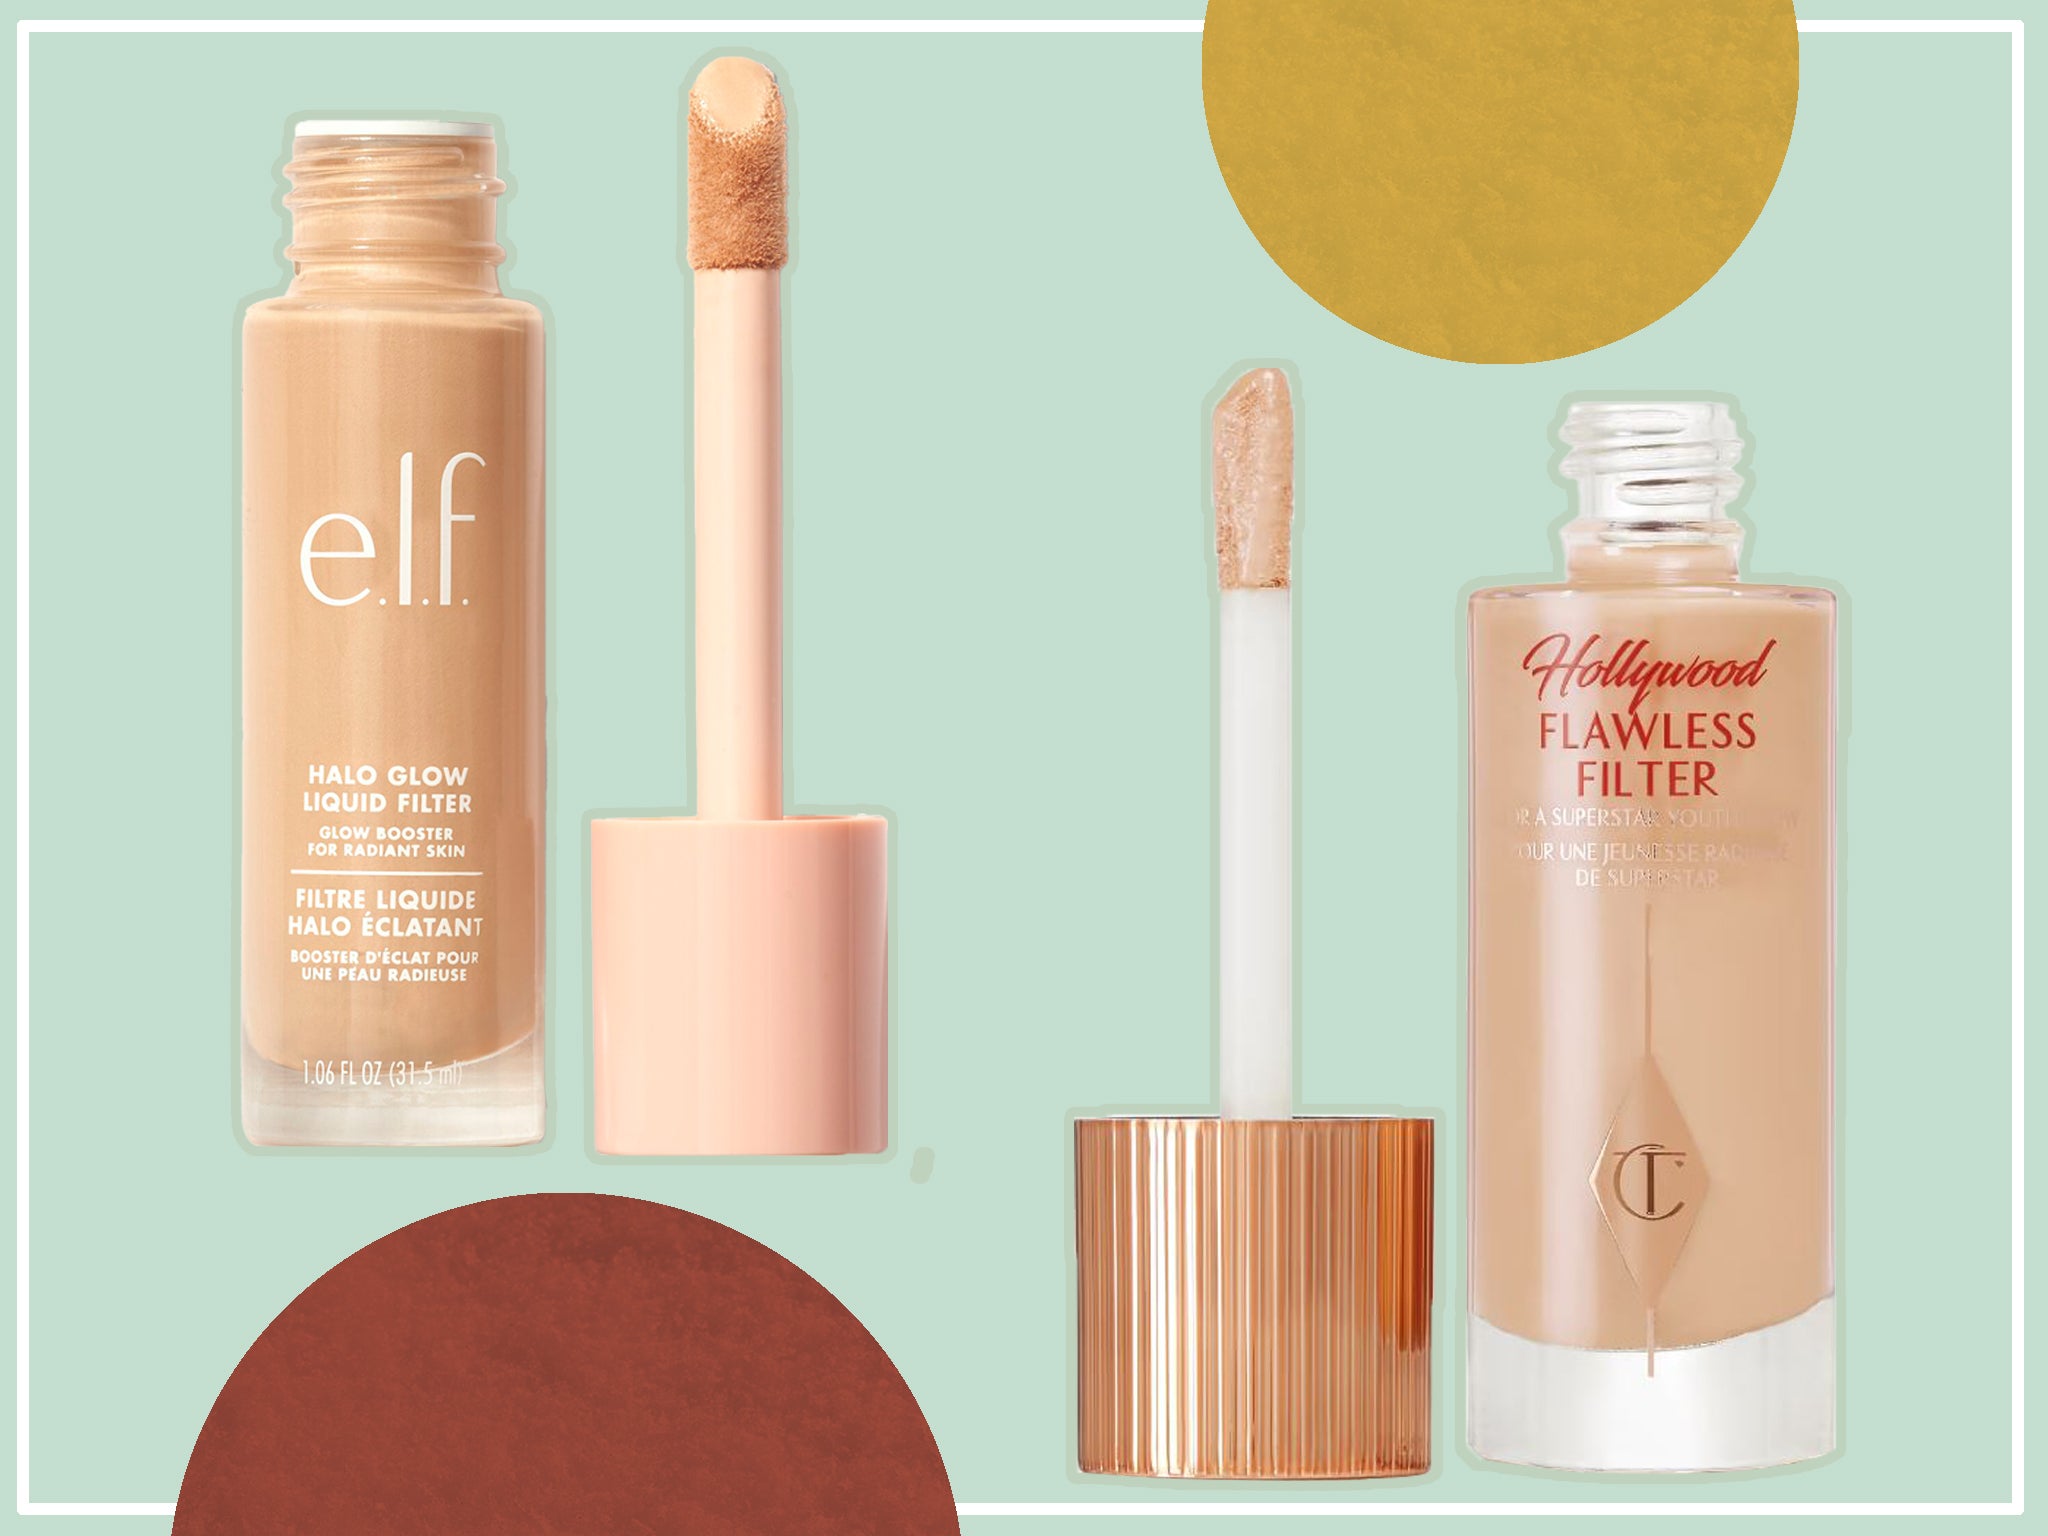 Charlotte Tilbury offers sparkle-free radiance – but how does E.l.f compare?